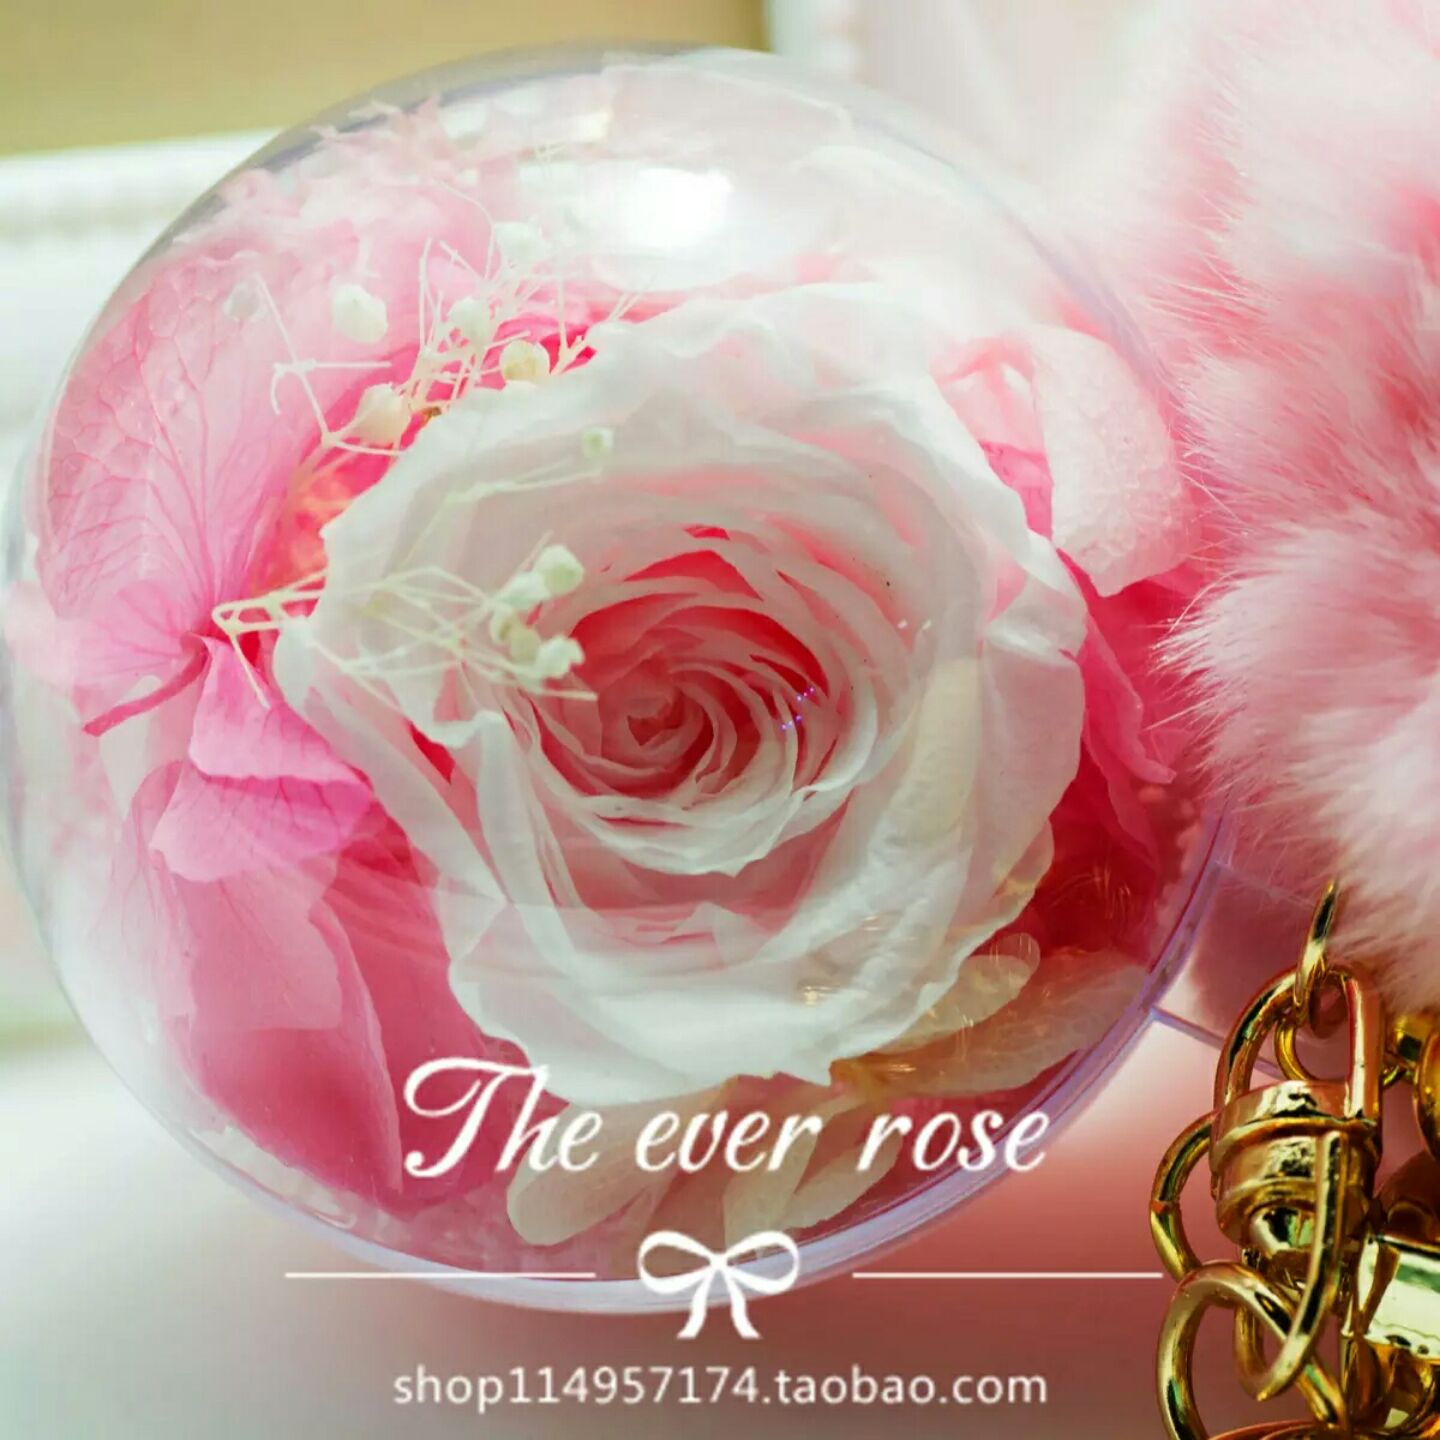 The ever rose